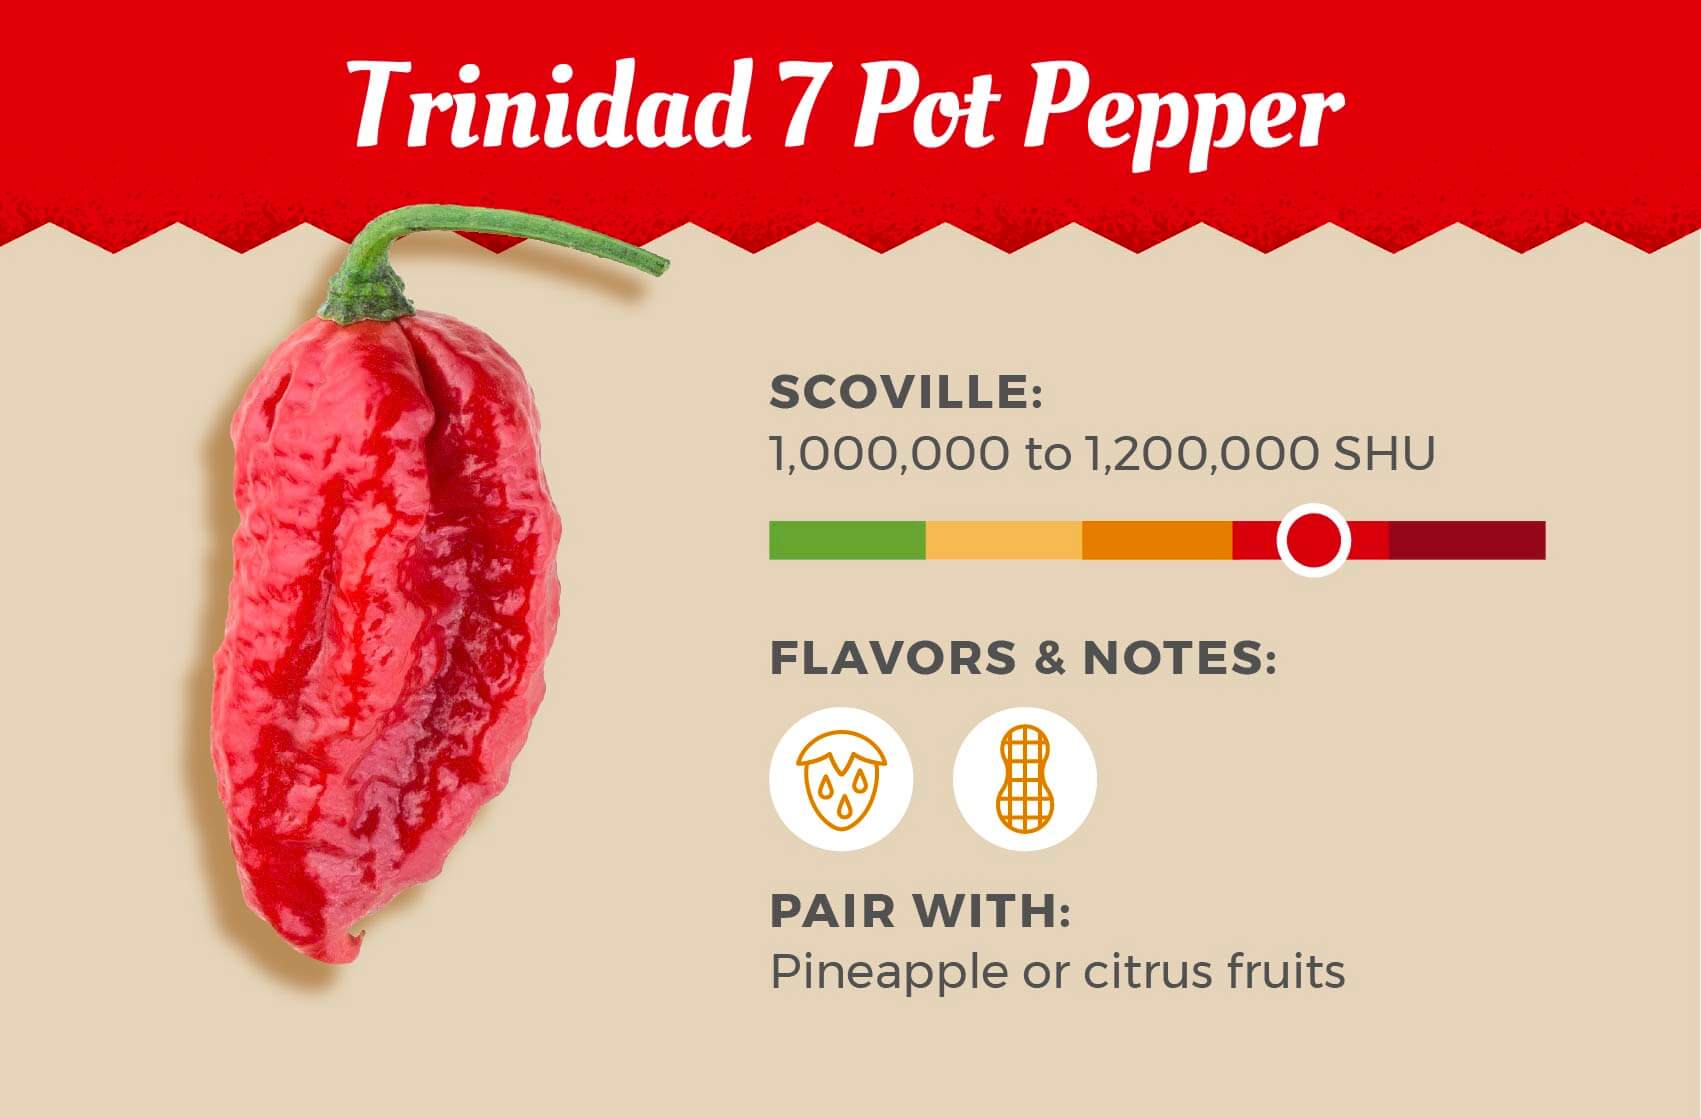 Trinidad 7 Pot Pepper is the number 6 hottest pepper on this list with a high score of 1.2 million Scoville heat units, pair it with pineapple or citrus fruits.